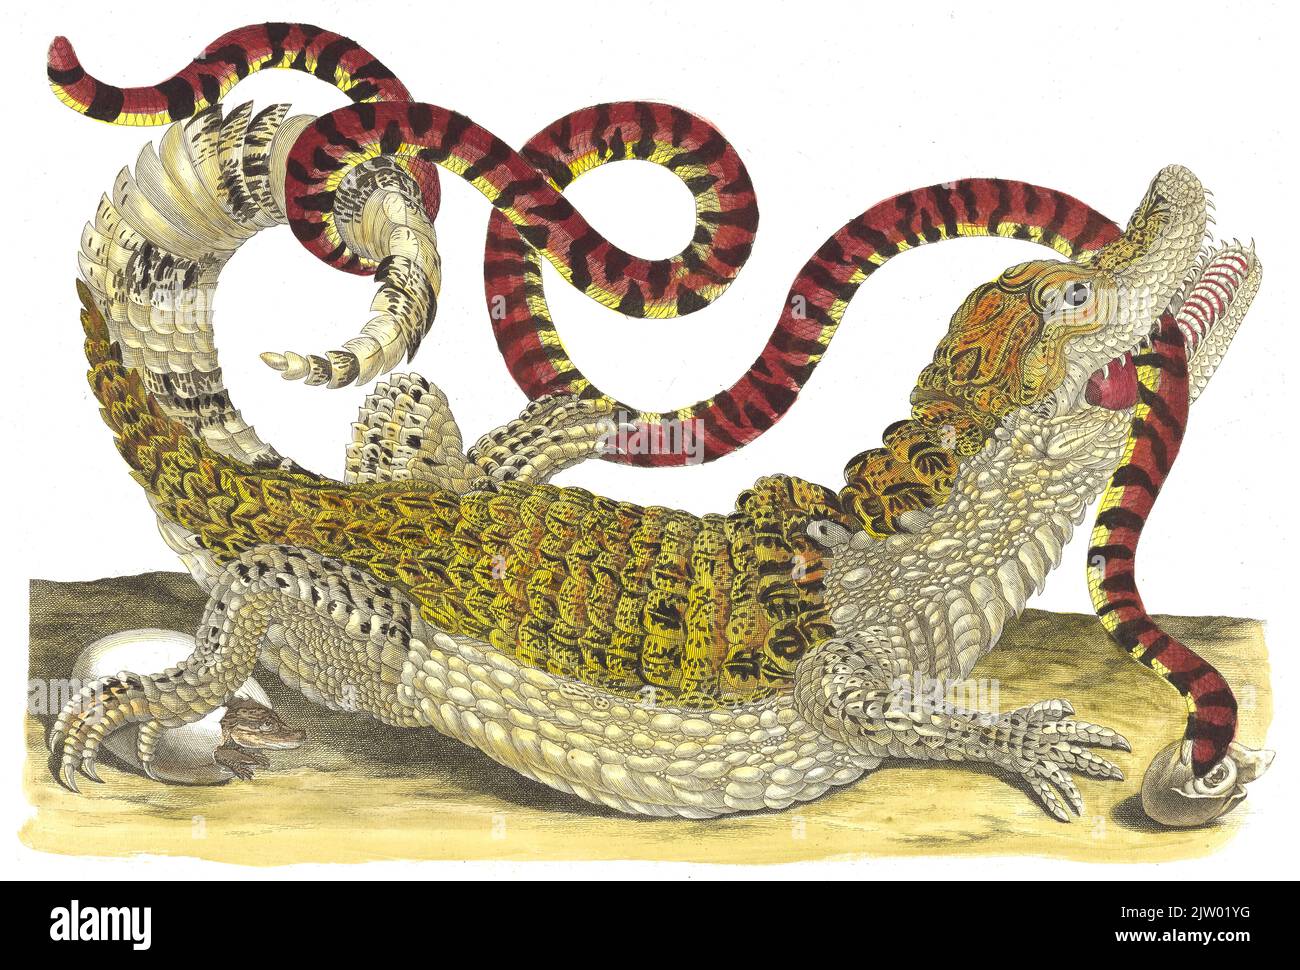 Maria Sibylla Merian - A watercolour of a Spectacled Caiman (Caiman crocodilus) holding a False Coral Snake (Anilius scytale) in its mouth - 1705 Stock Photo